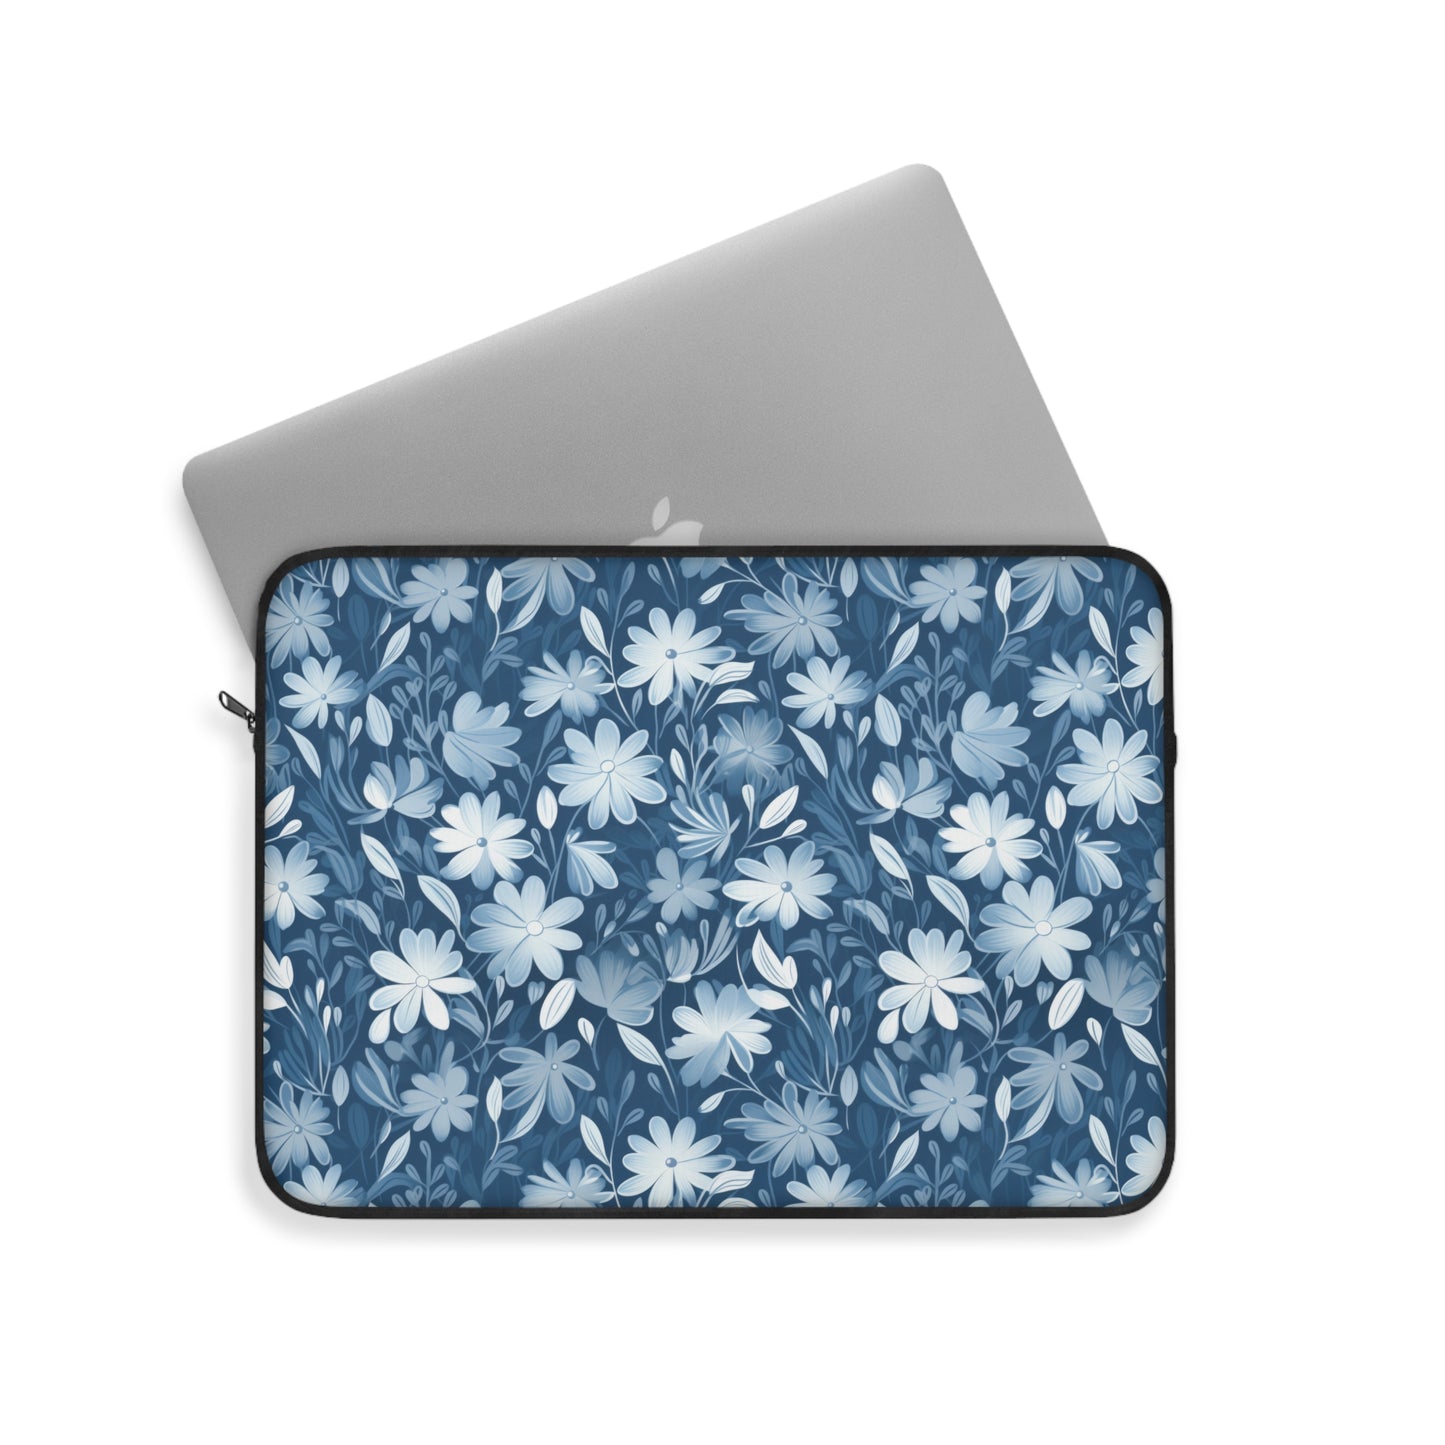 Gentle Elegance: Soft Muted Blue Flower Design - Laptop or Ipad Protective Sleeve 3 Sizes